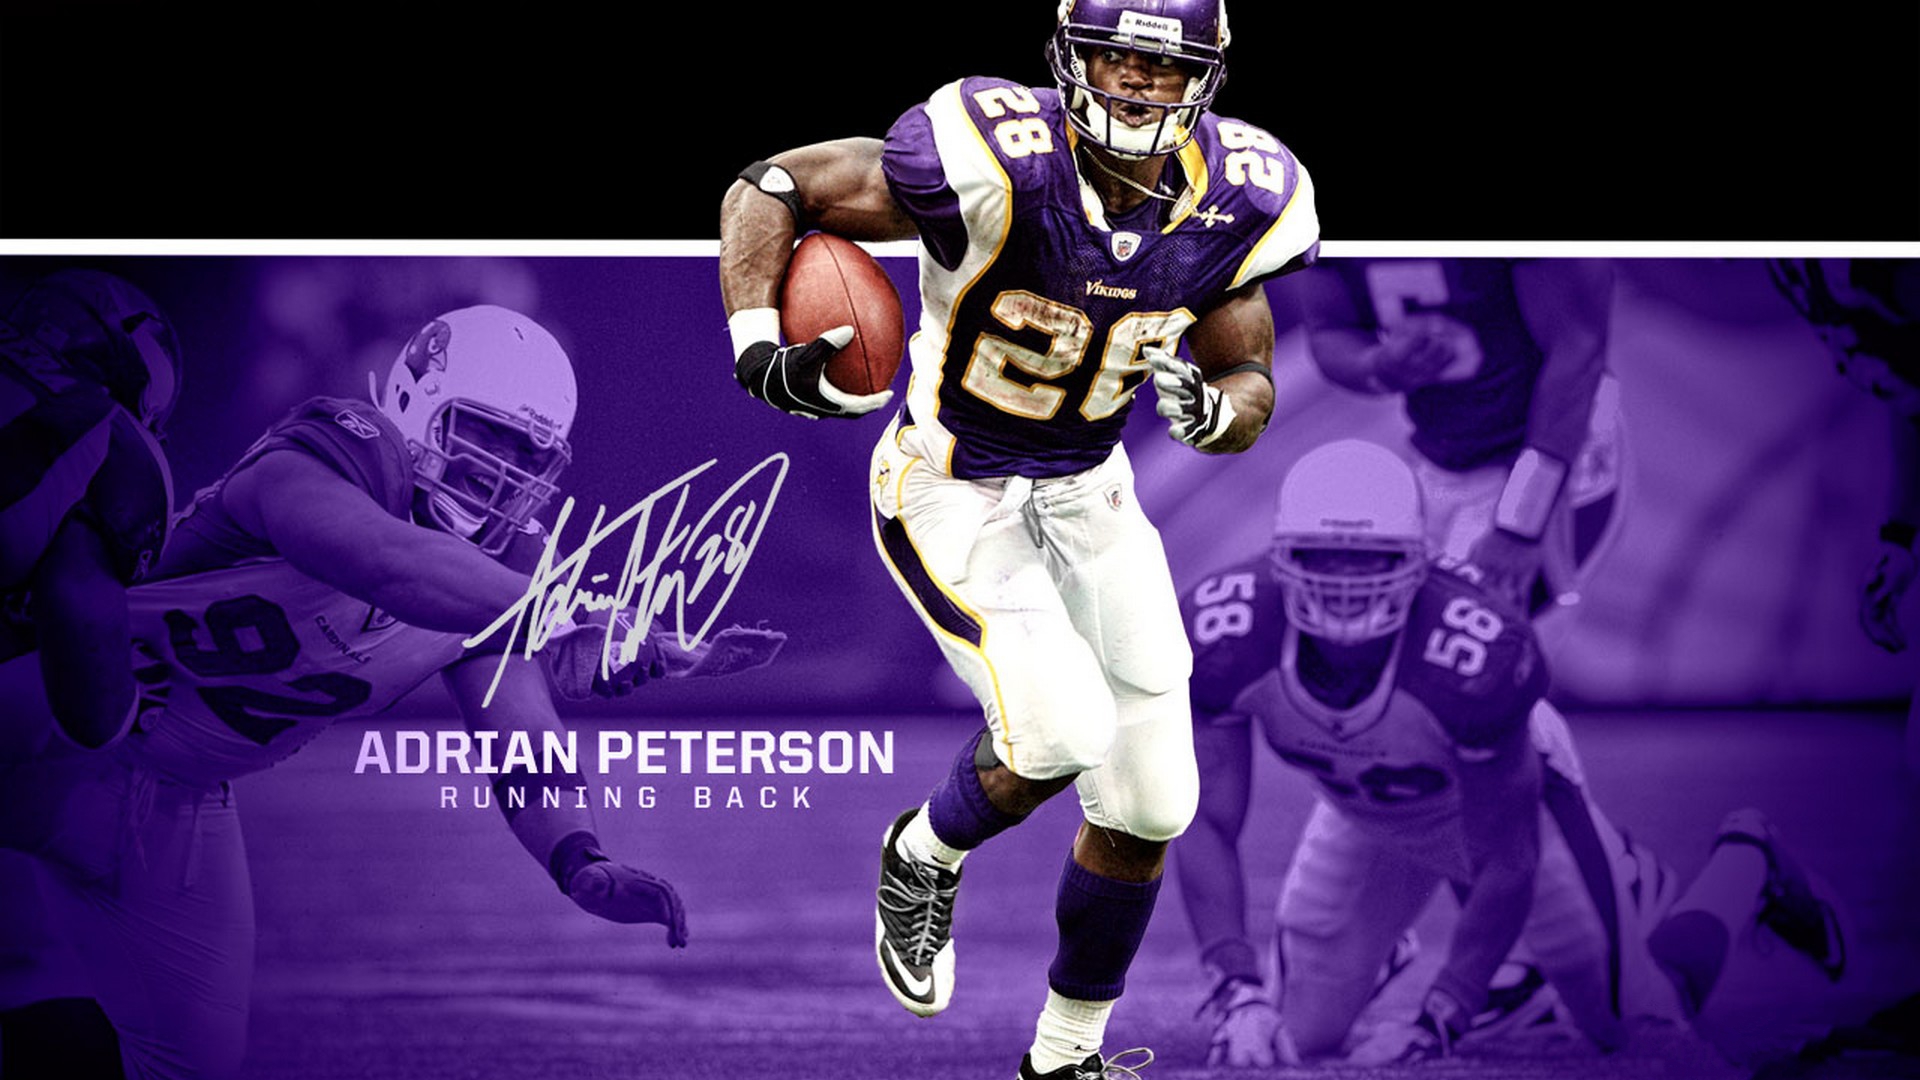 Adrian Peterson With Vikings Background - HD Wallpaper 